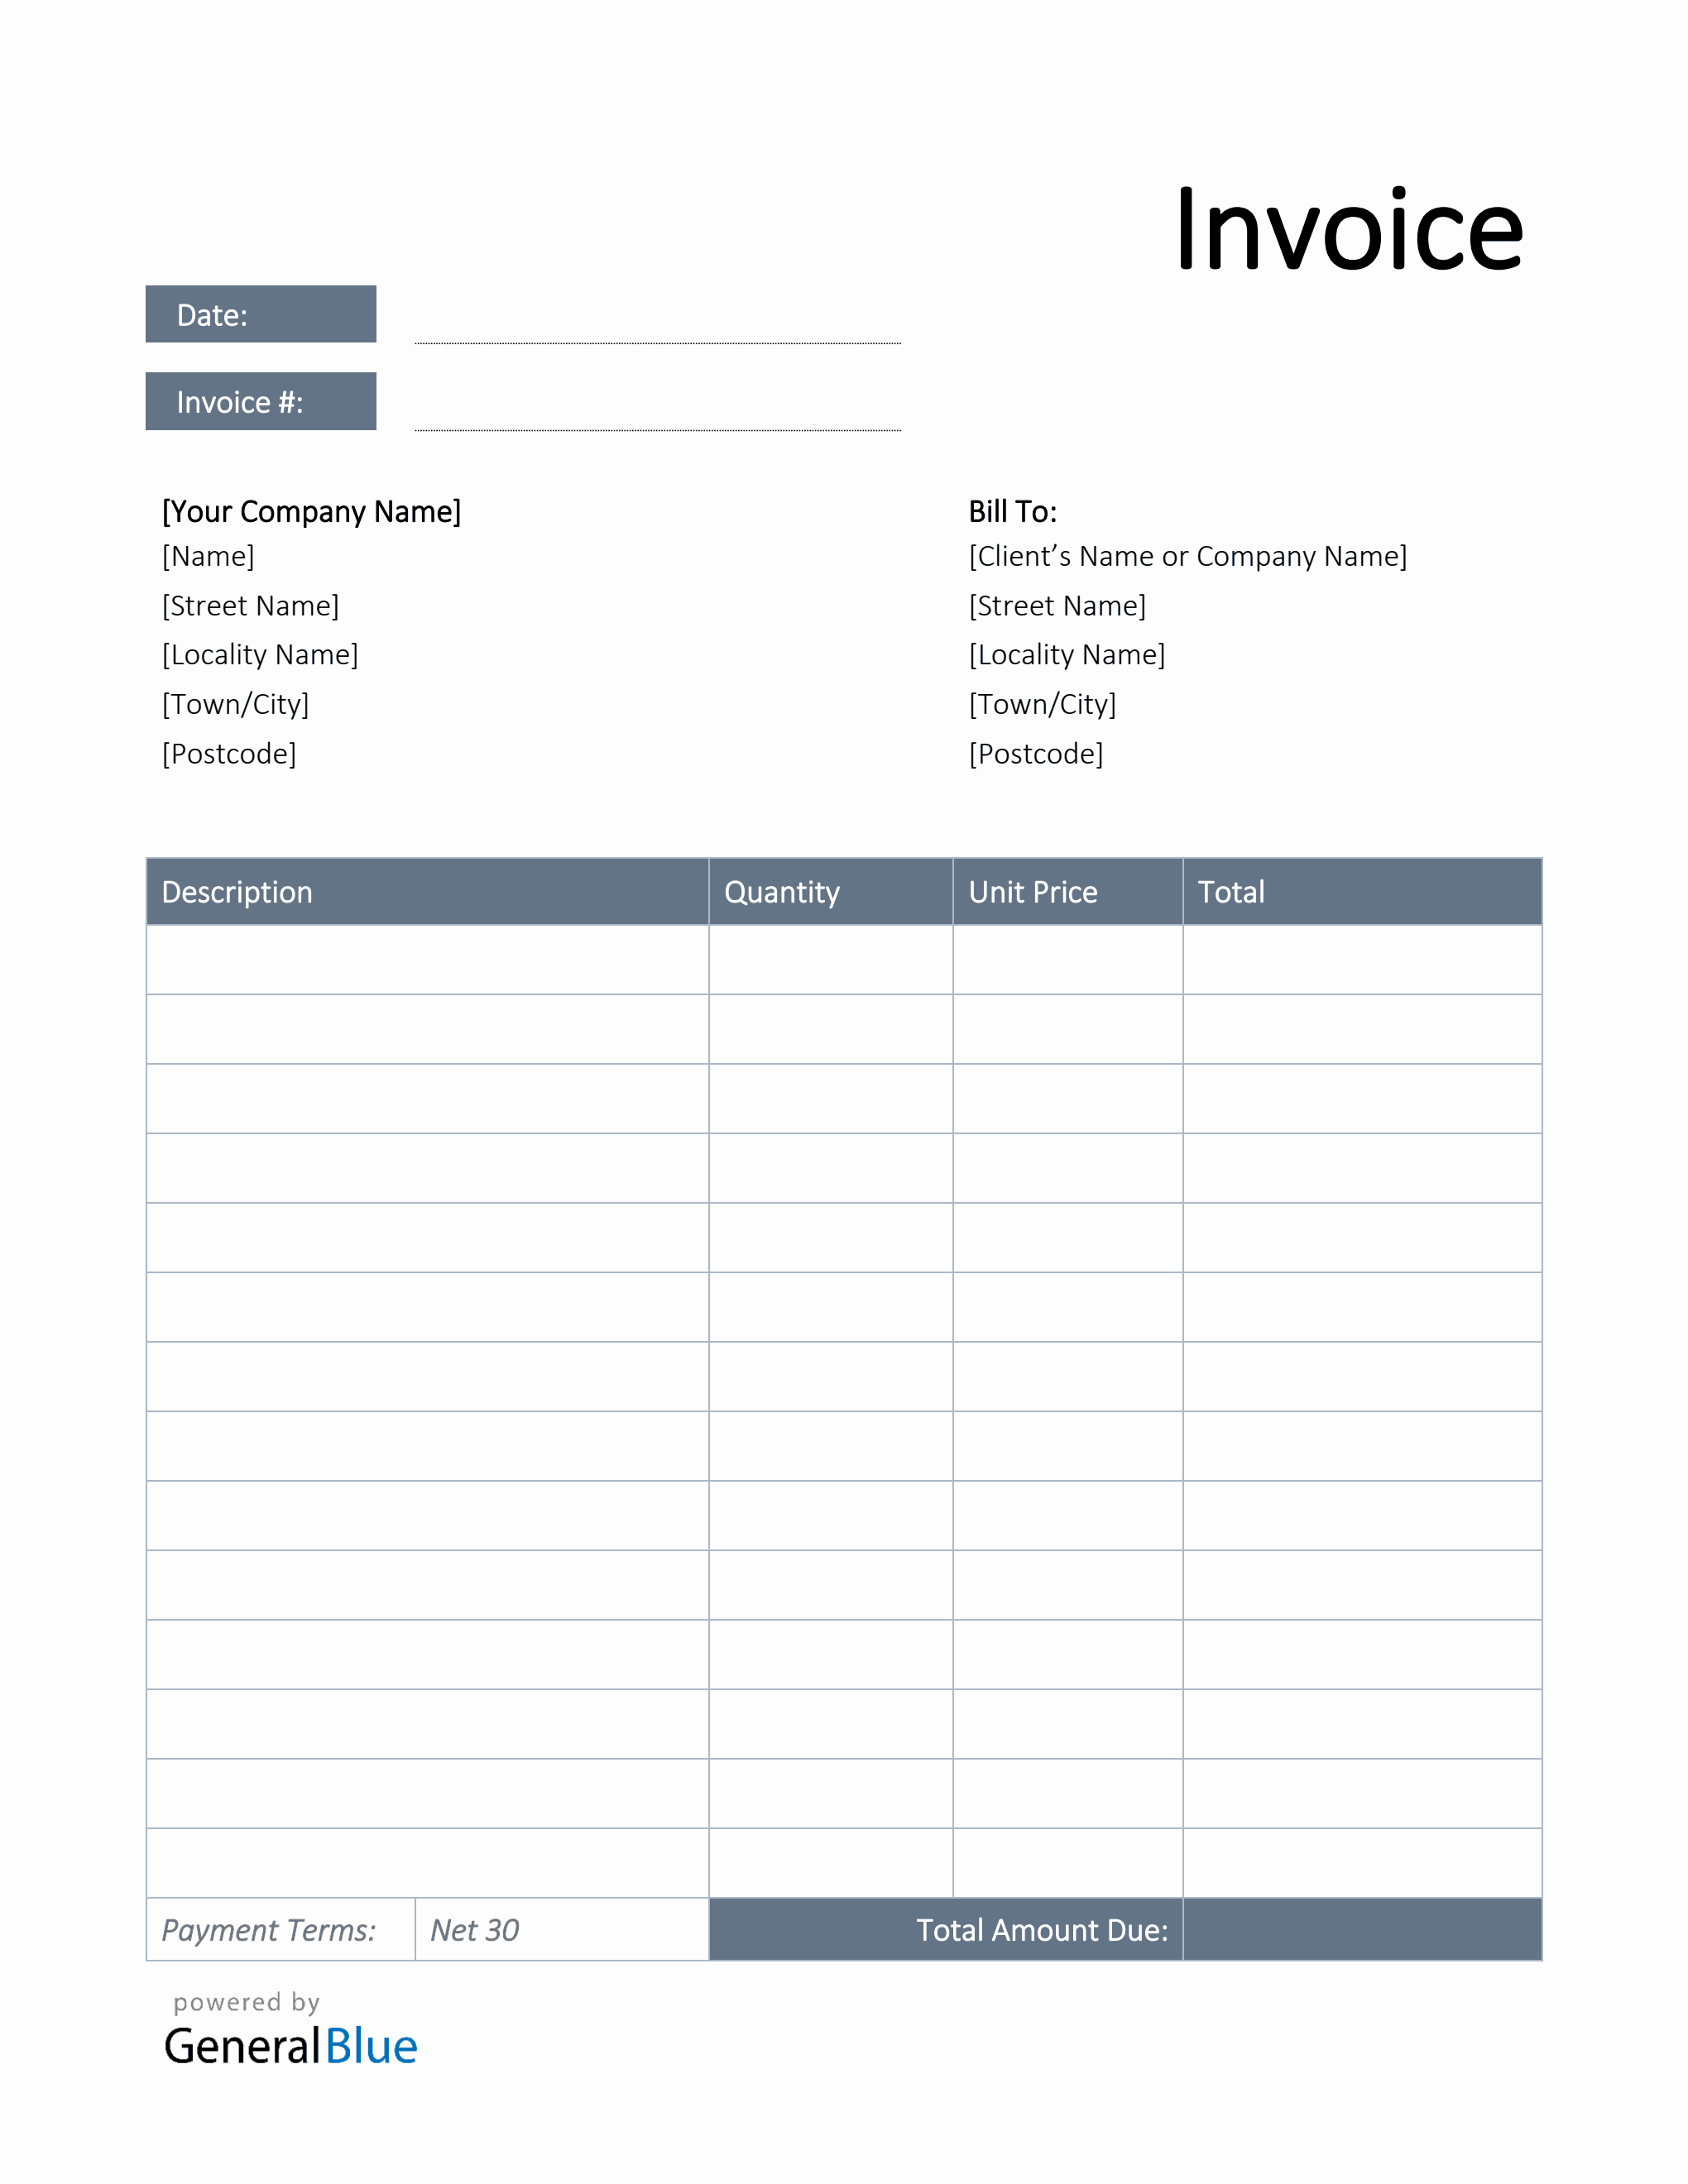 Invoice Template for U.K. in Word (Simple) Inside Business Invoice Template Uk